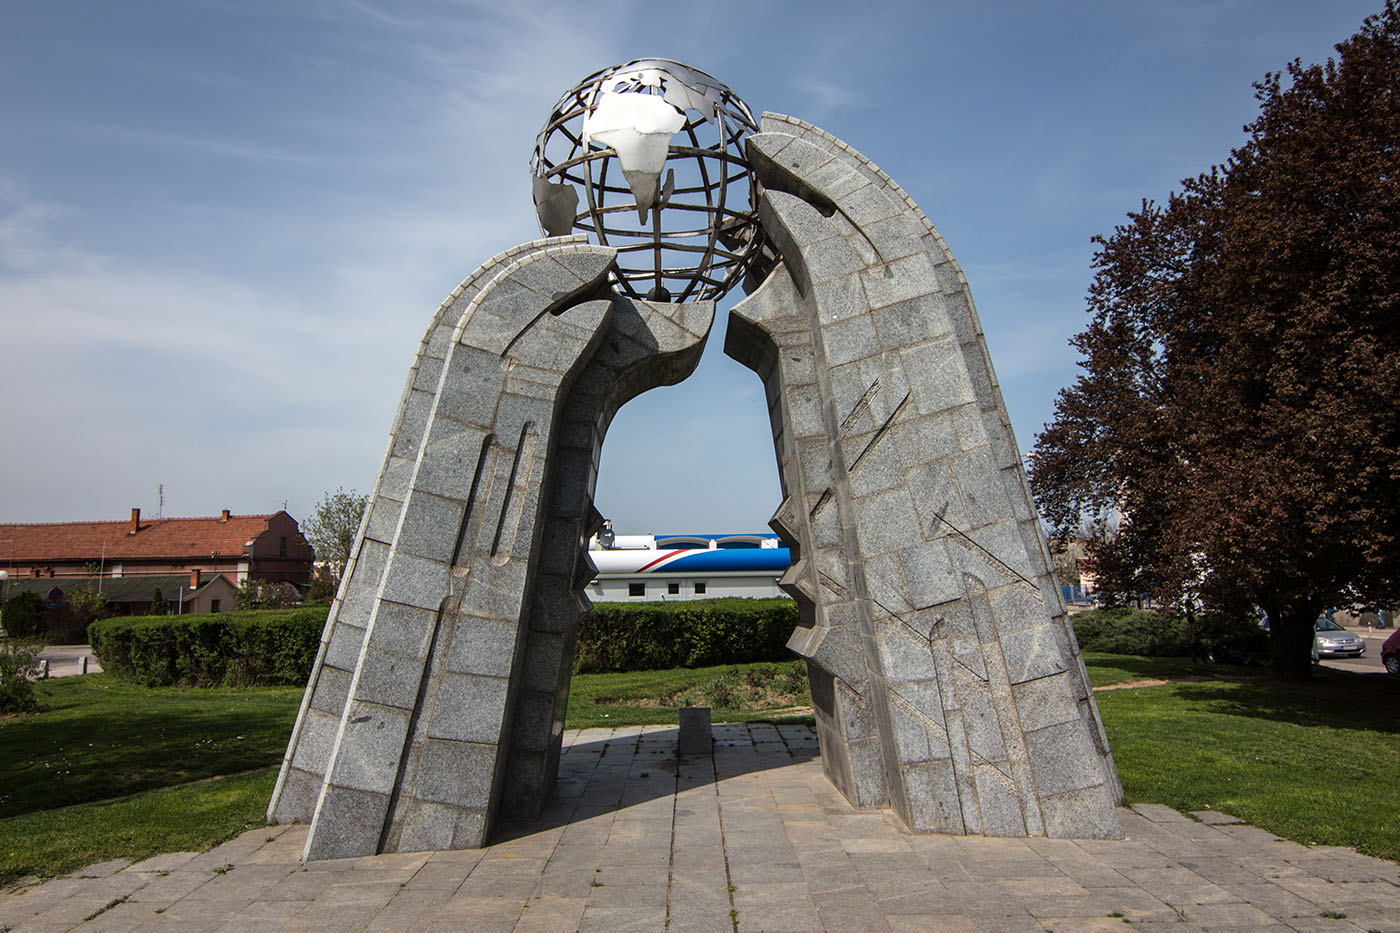 Monument to Peace at Krusevac, Serbia (Date and architect unknown).